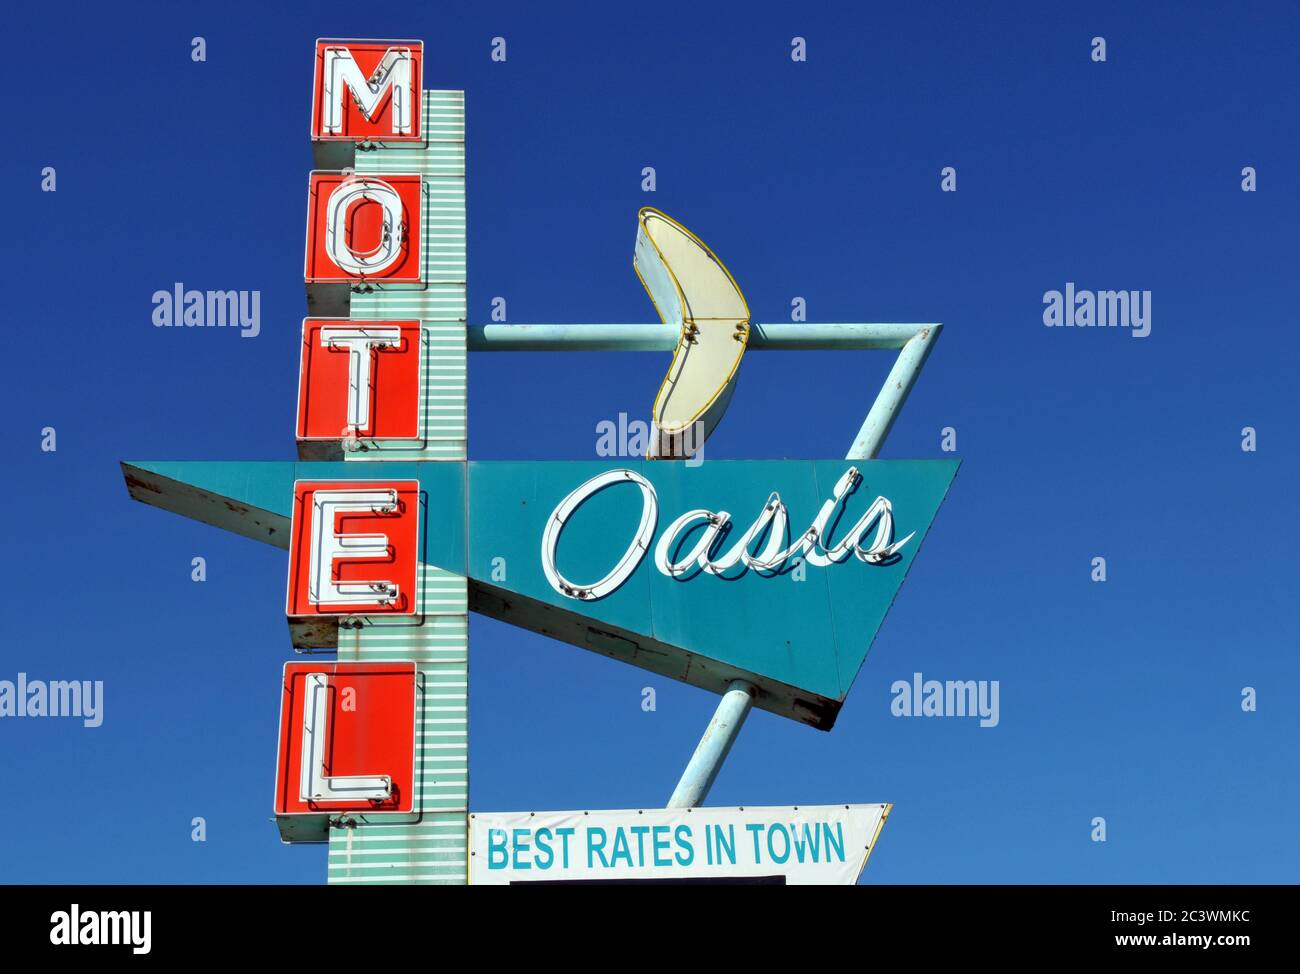 Colourful vintage neon sign against a blue sky advertising the Oasis Motel on Route 66 in Tulsa, Oklahoma. Stock Photo